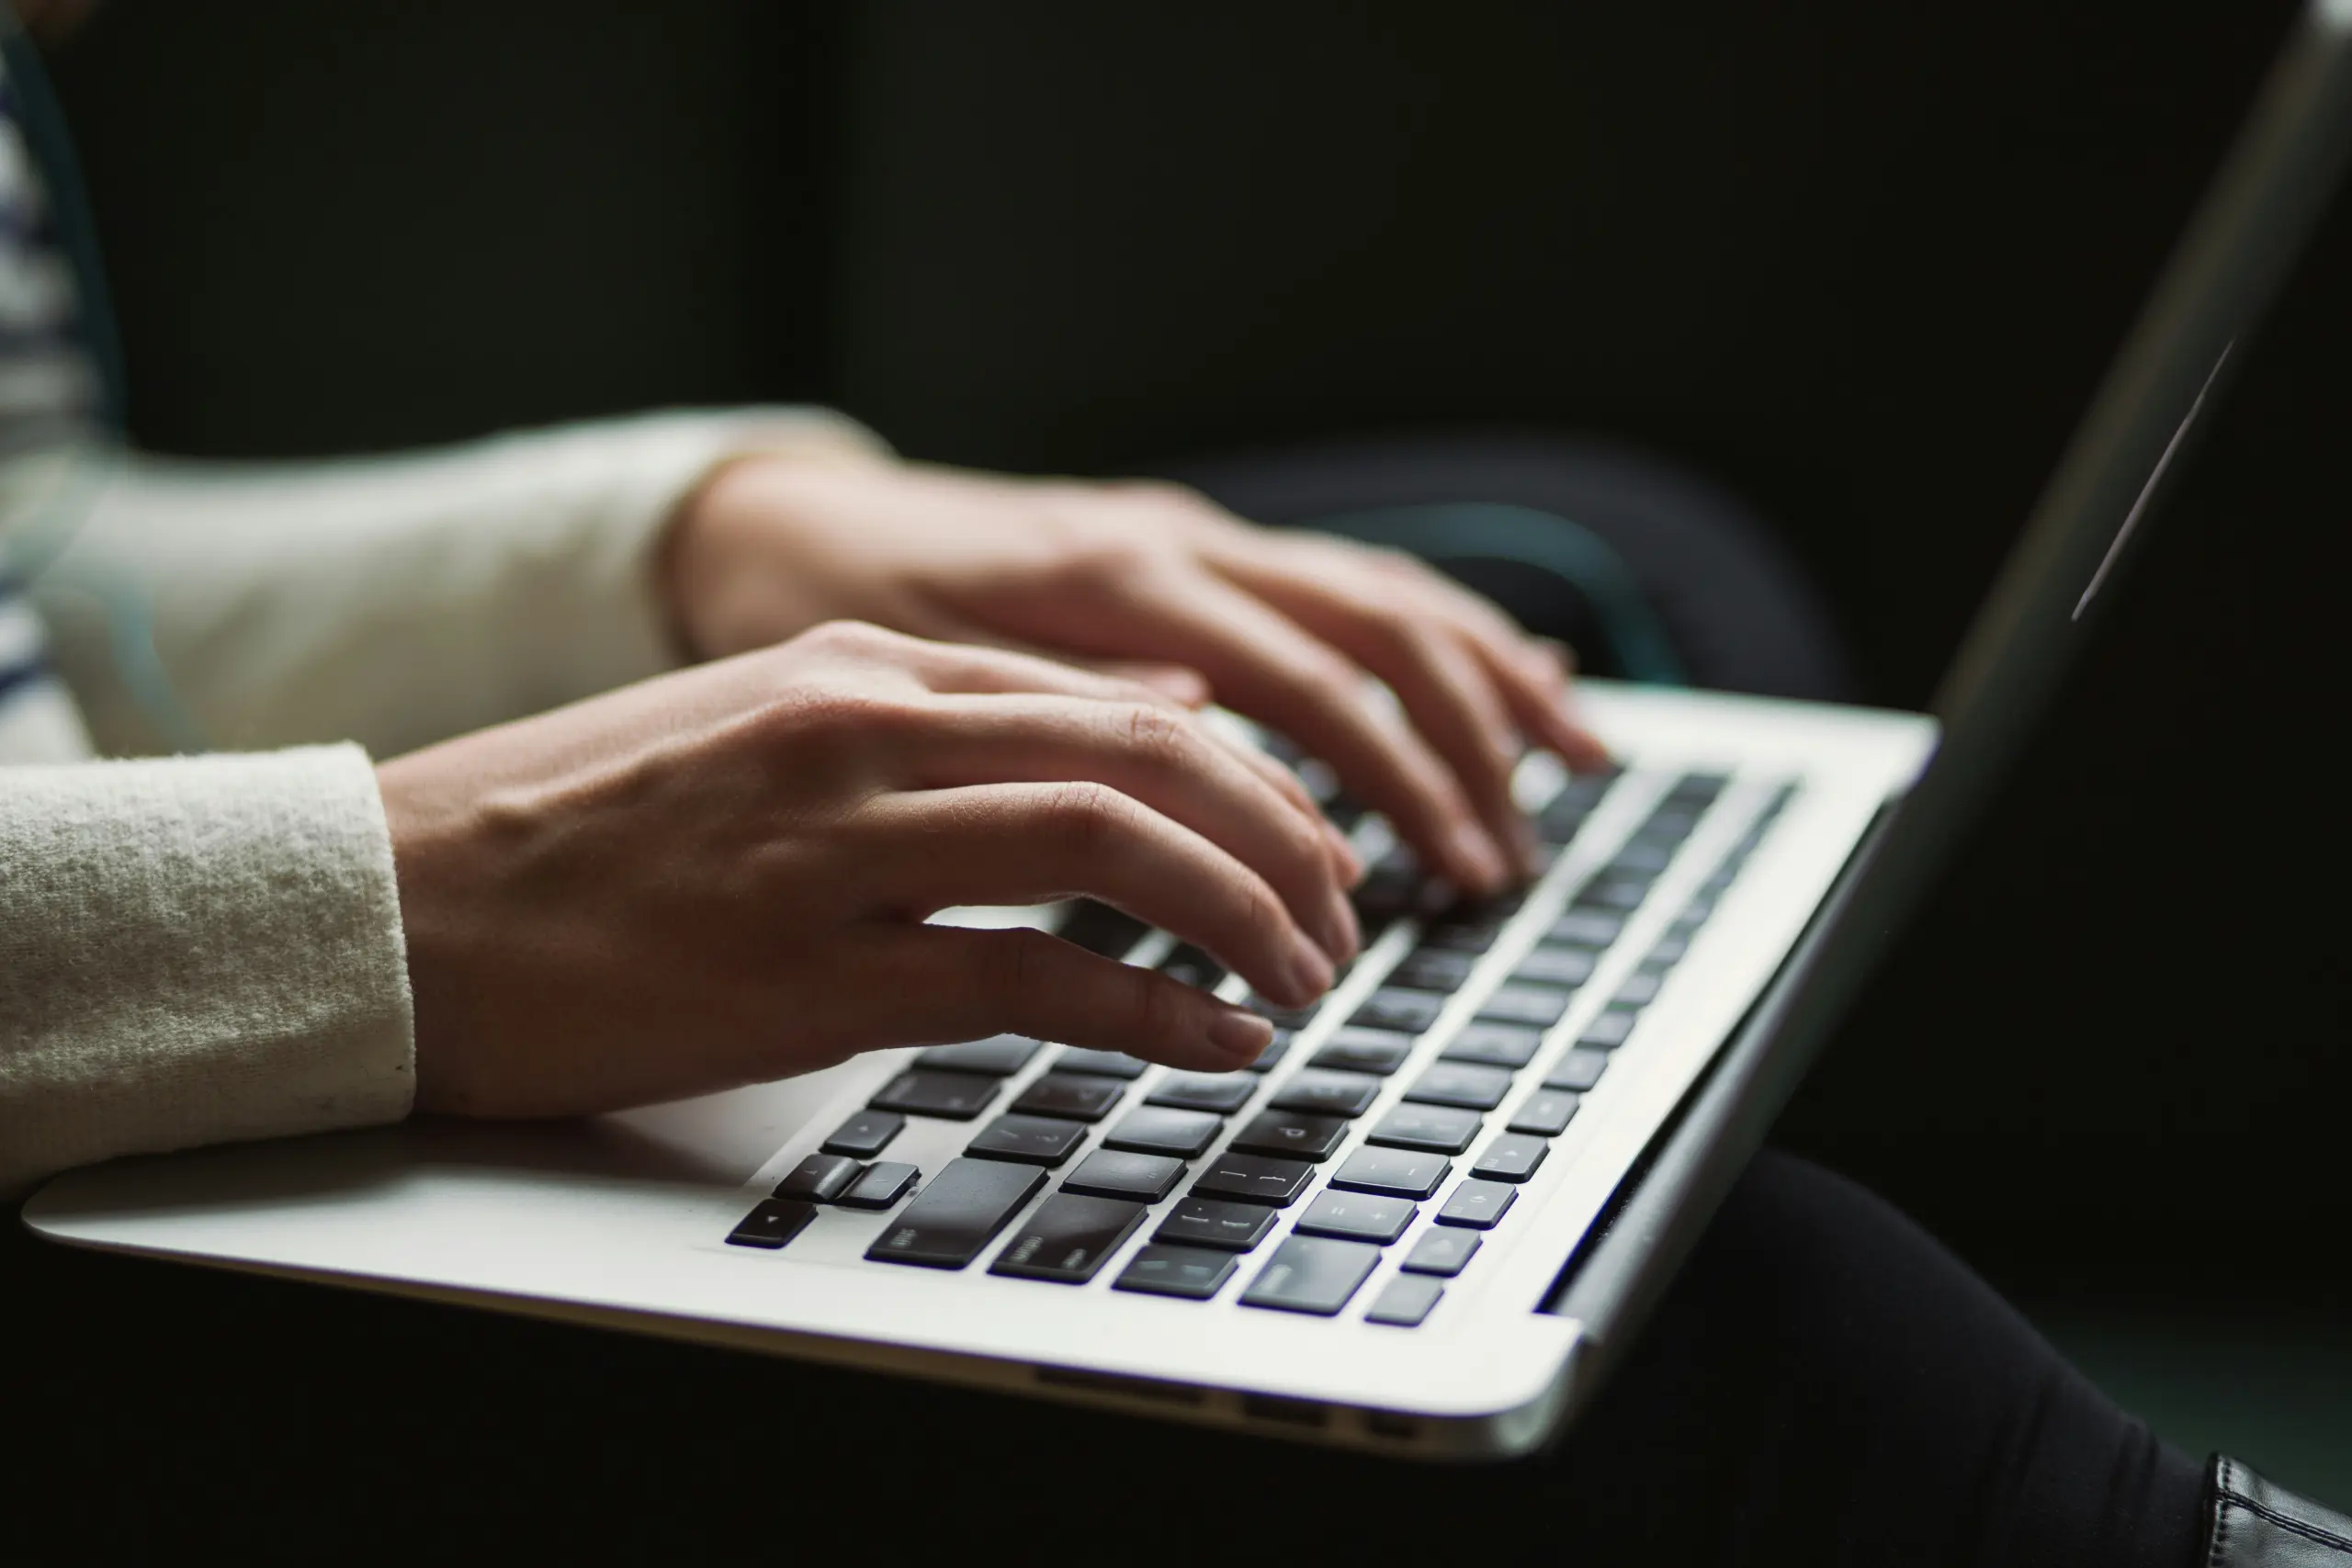 A woman's hands typing on a laptop's keyboard